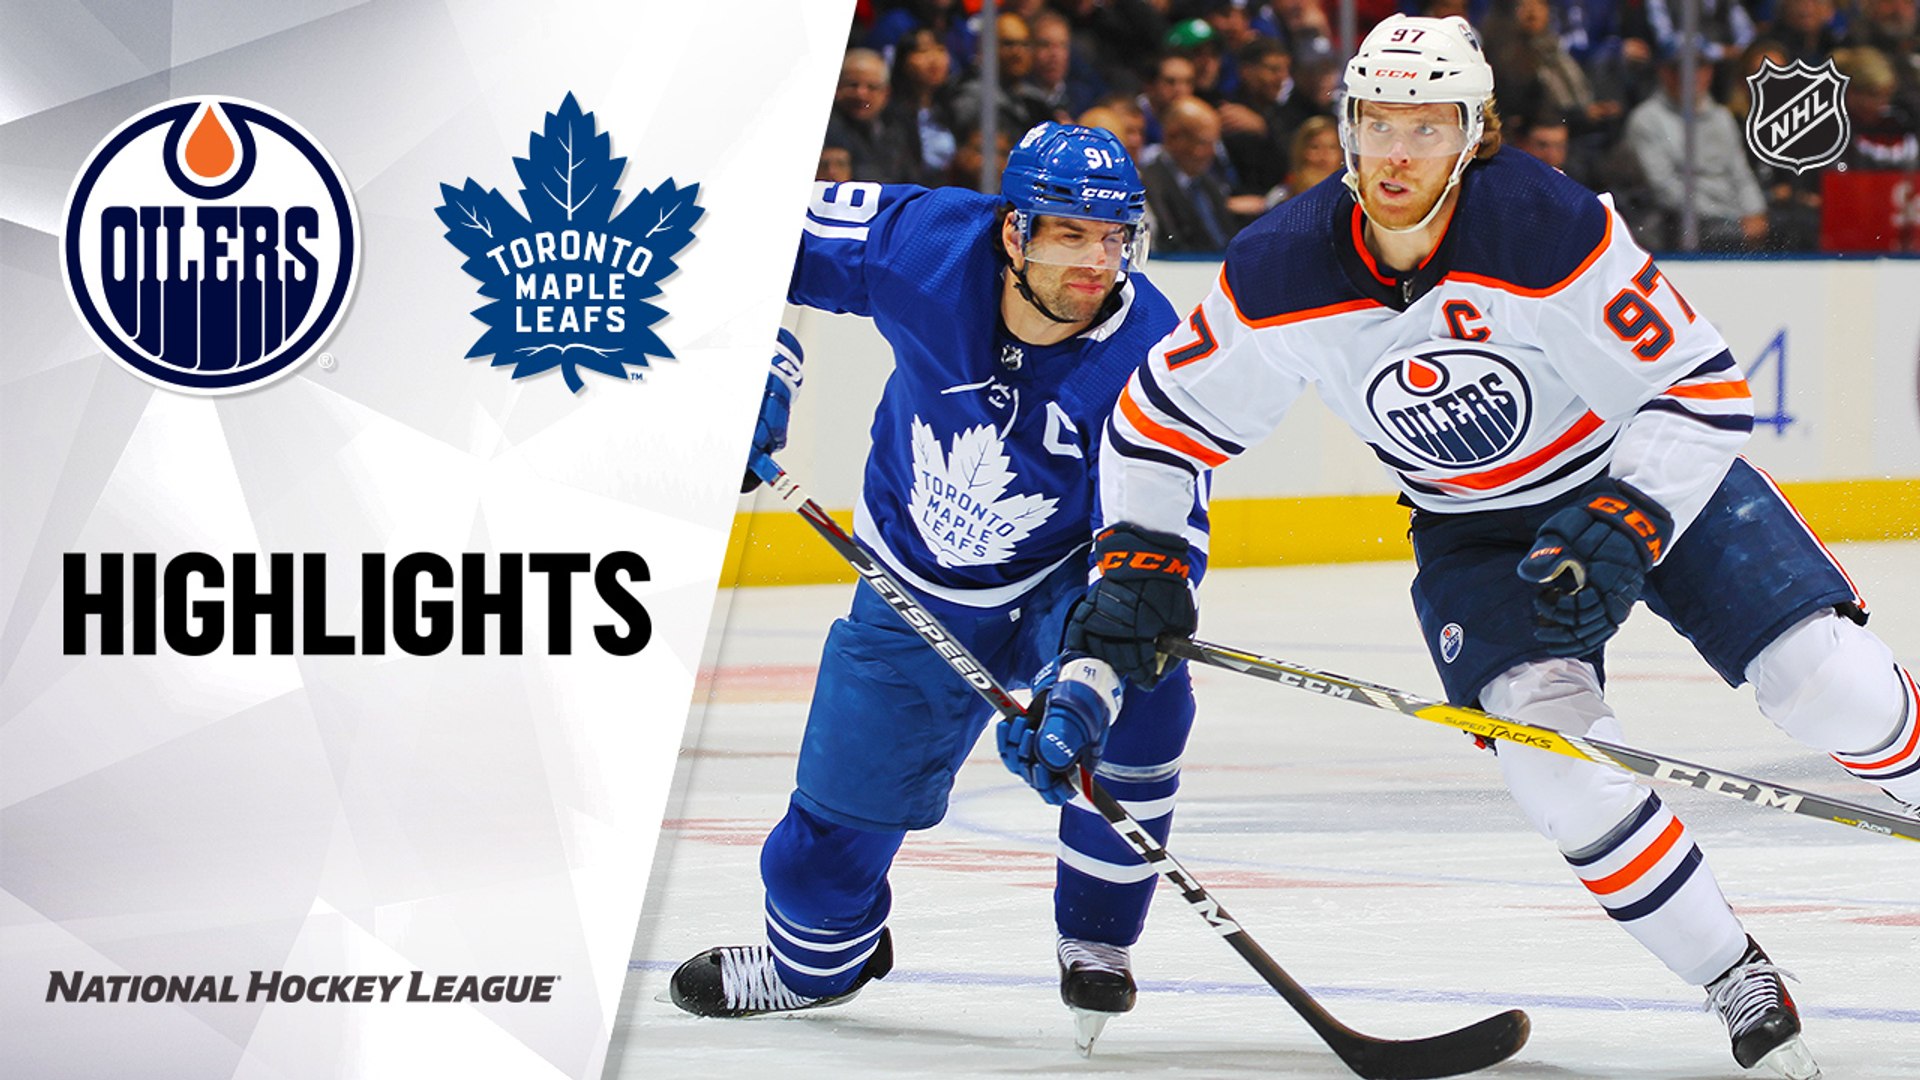 NHL Highlights | Oilers @ Maple Leafs 1/6/20 - video Dailymotion